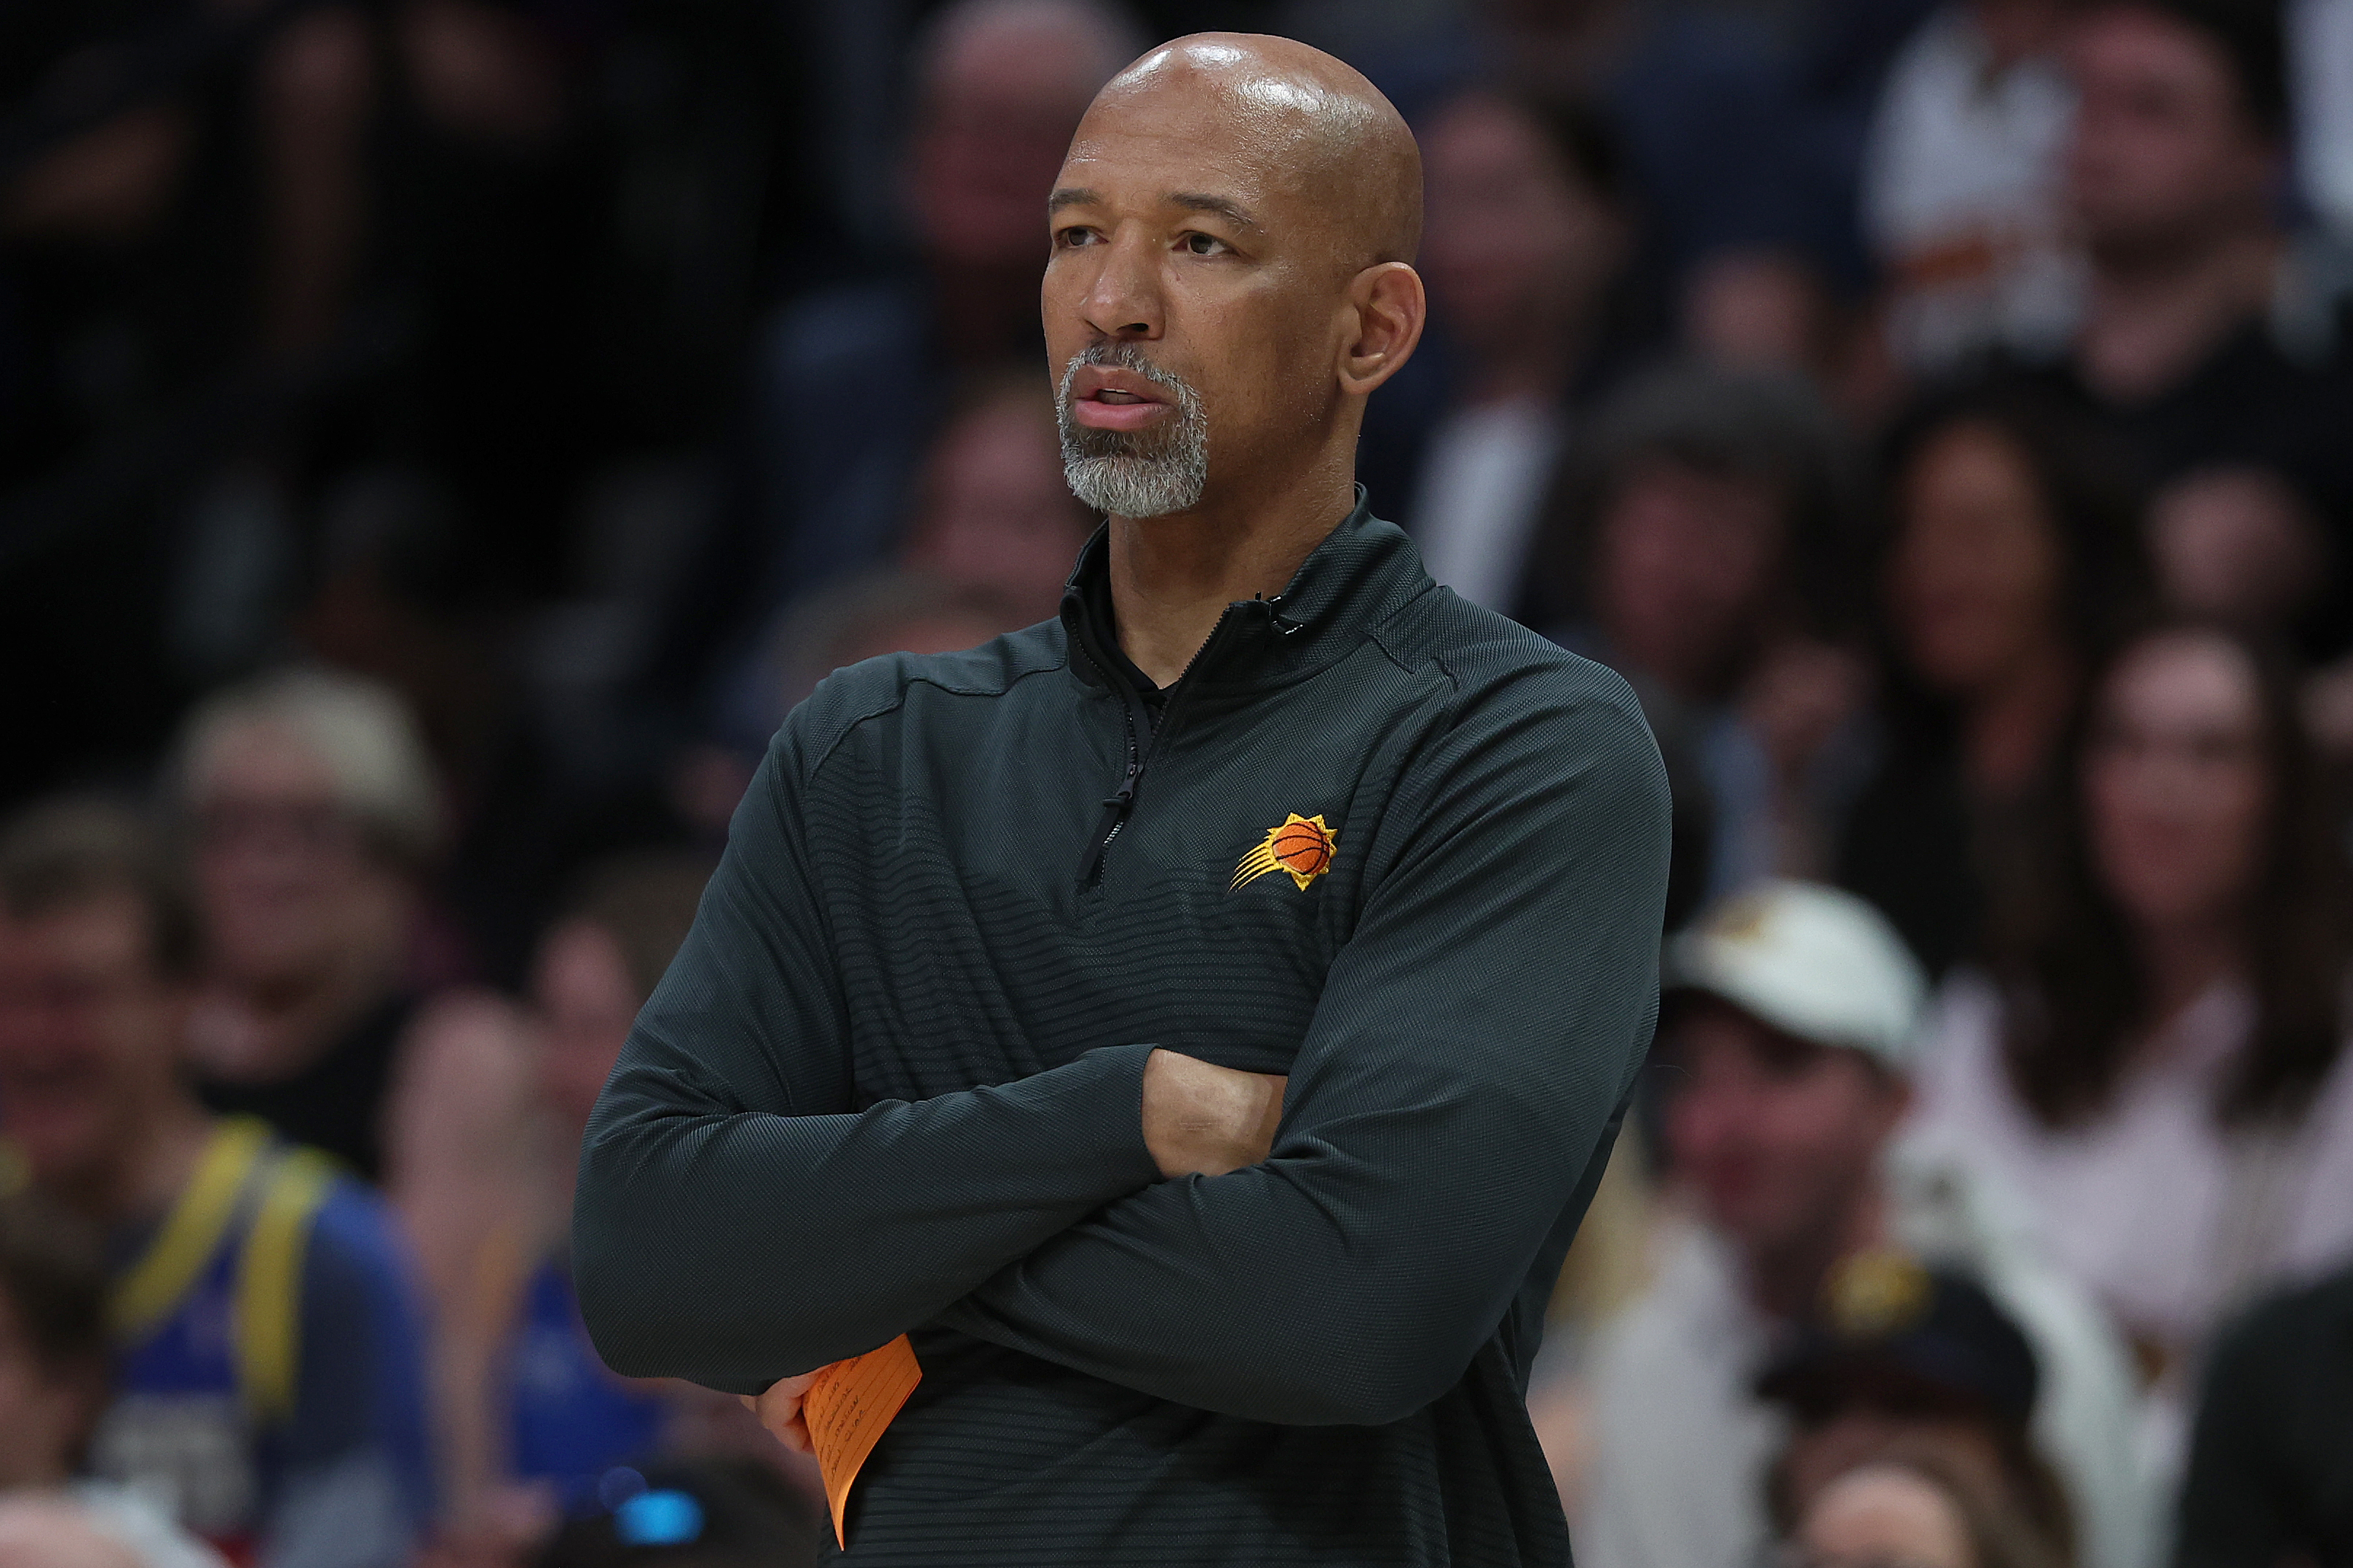 Monty Williams sees growth in himself since last time he coached CP3